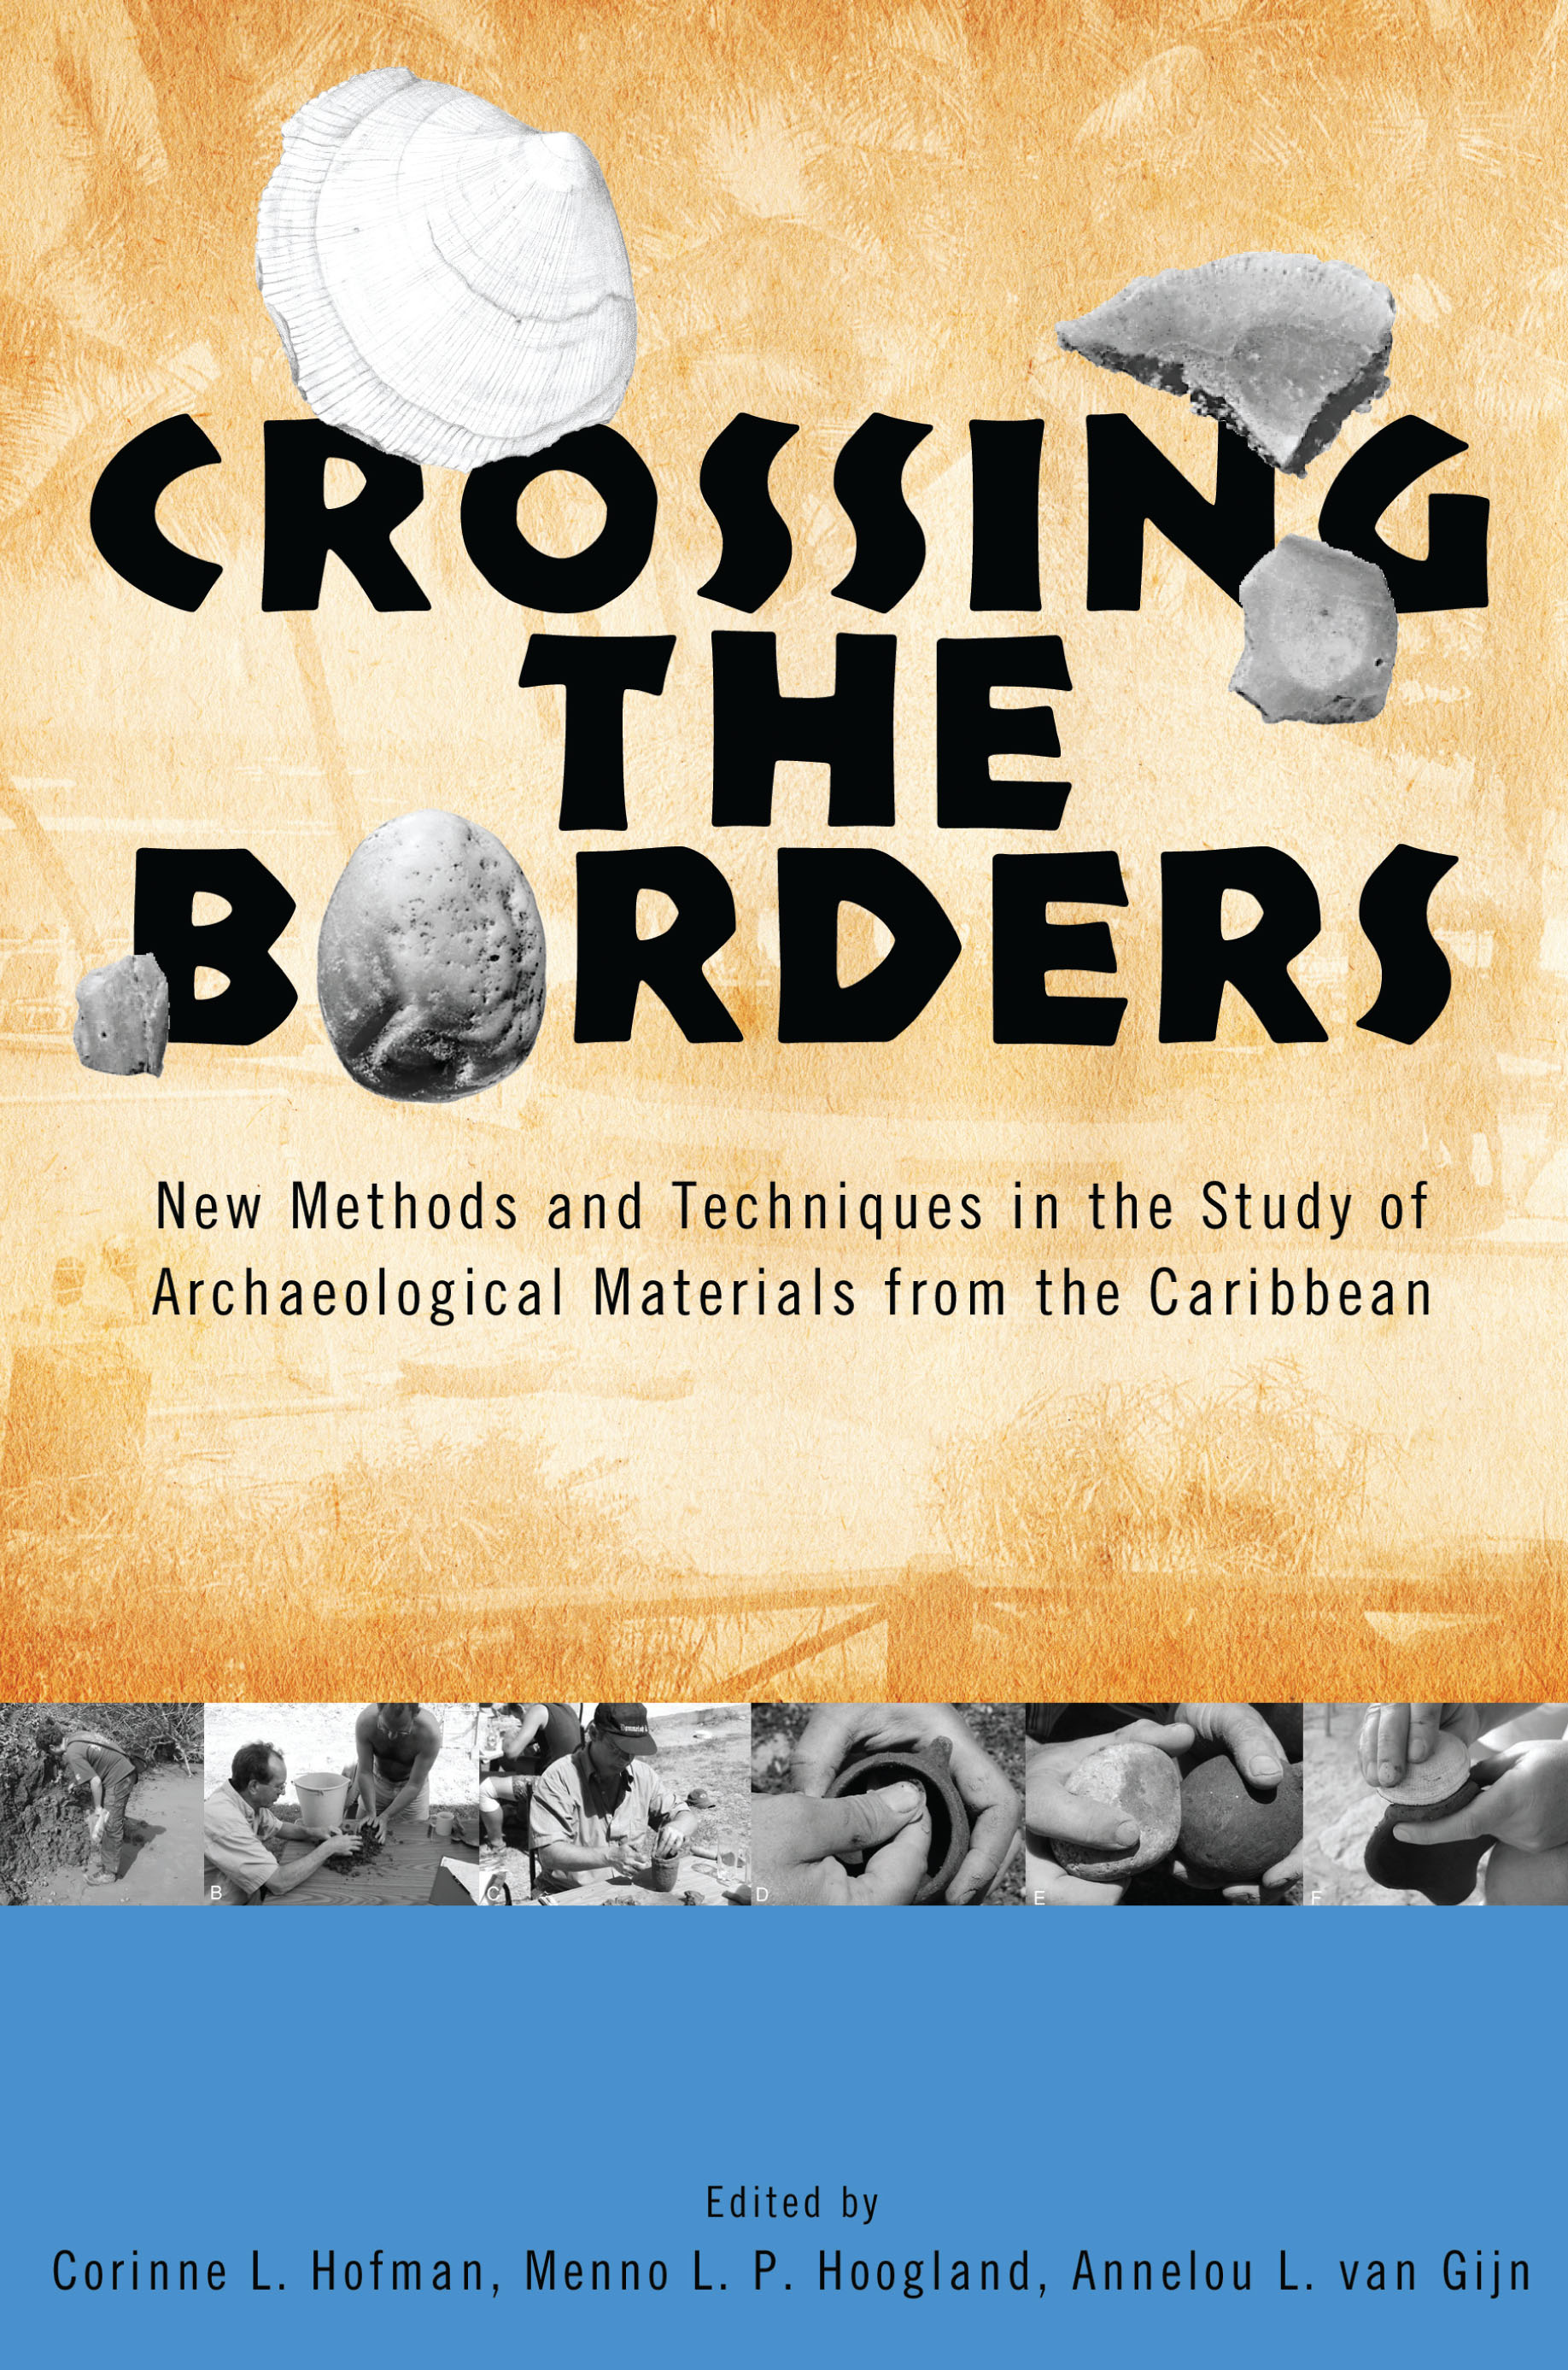 Crossing the Borders. New Methods and Techniques in the Study of Archaeological Materials from the Caribbean, 2008, 327 p.